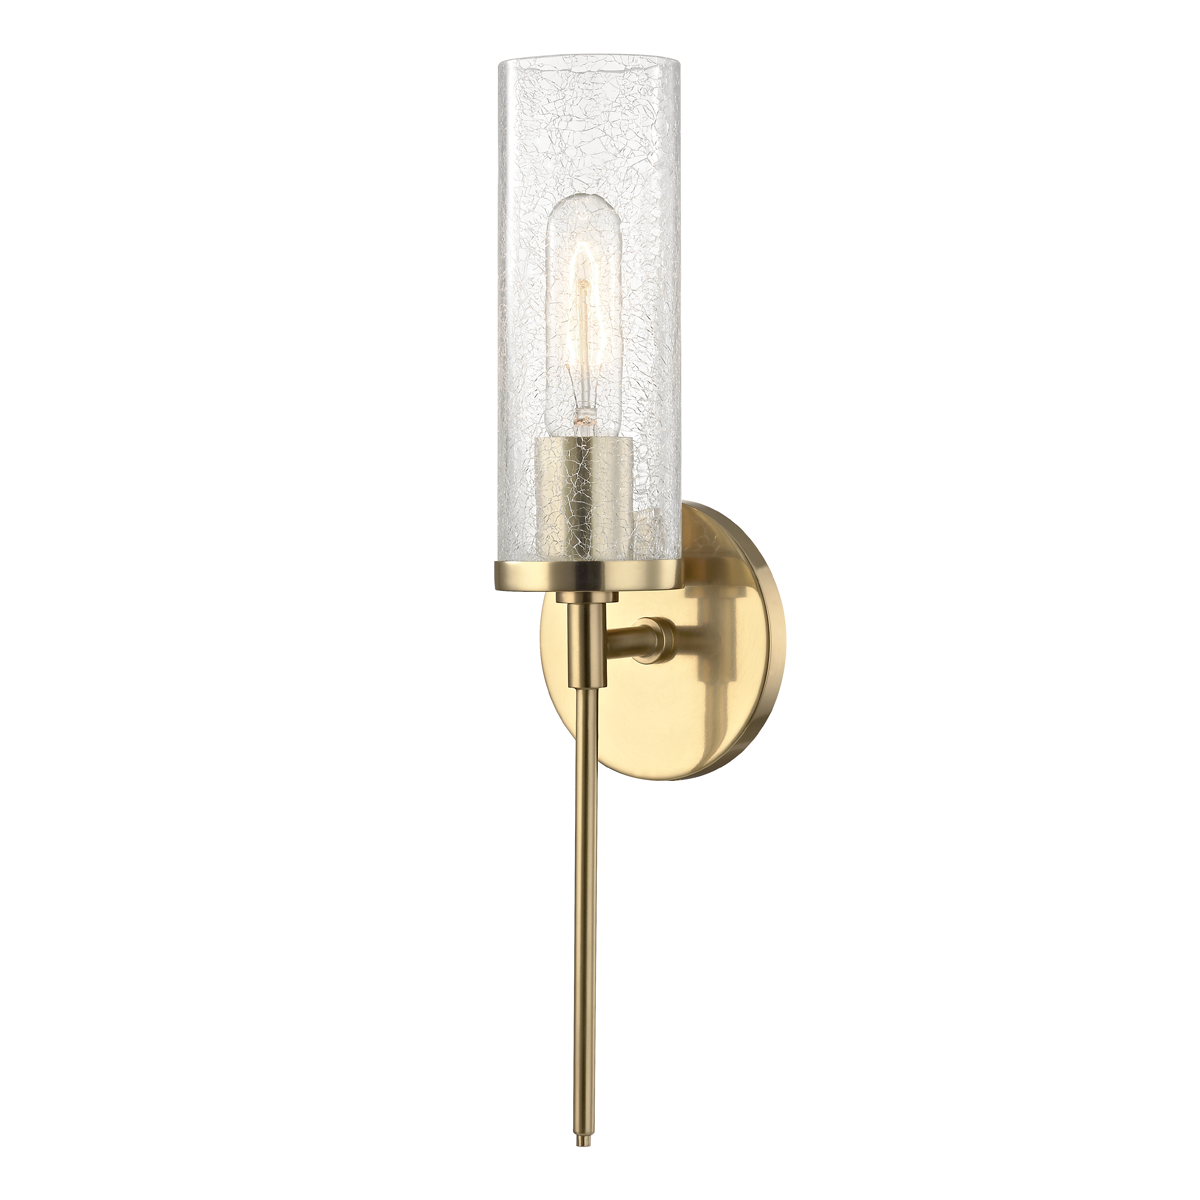 Mitzi by Hudson Valley Lighting Olivia 1-Light Old Bronze Wall Sconce with White 